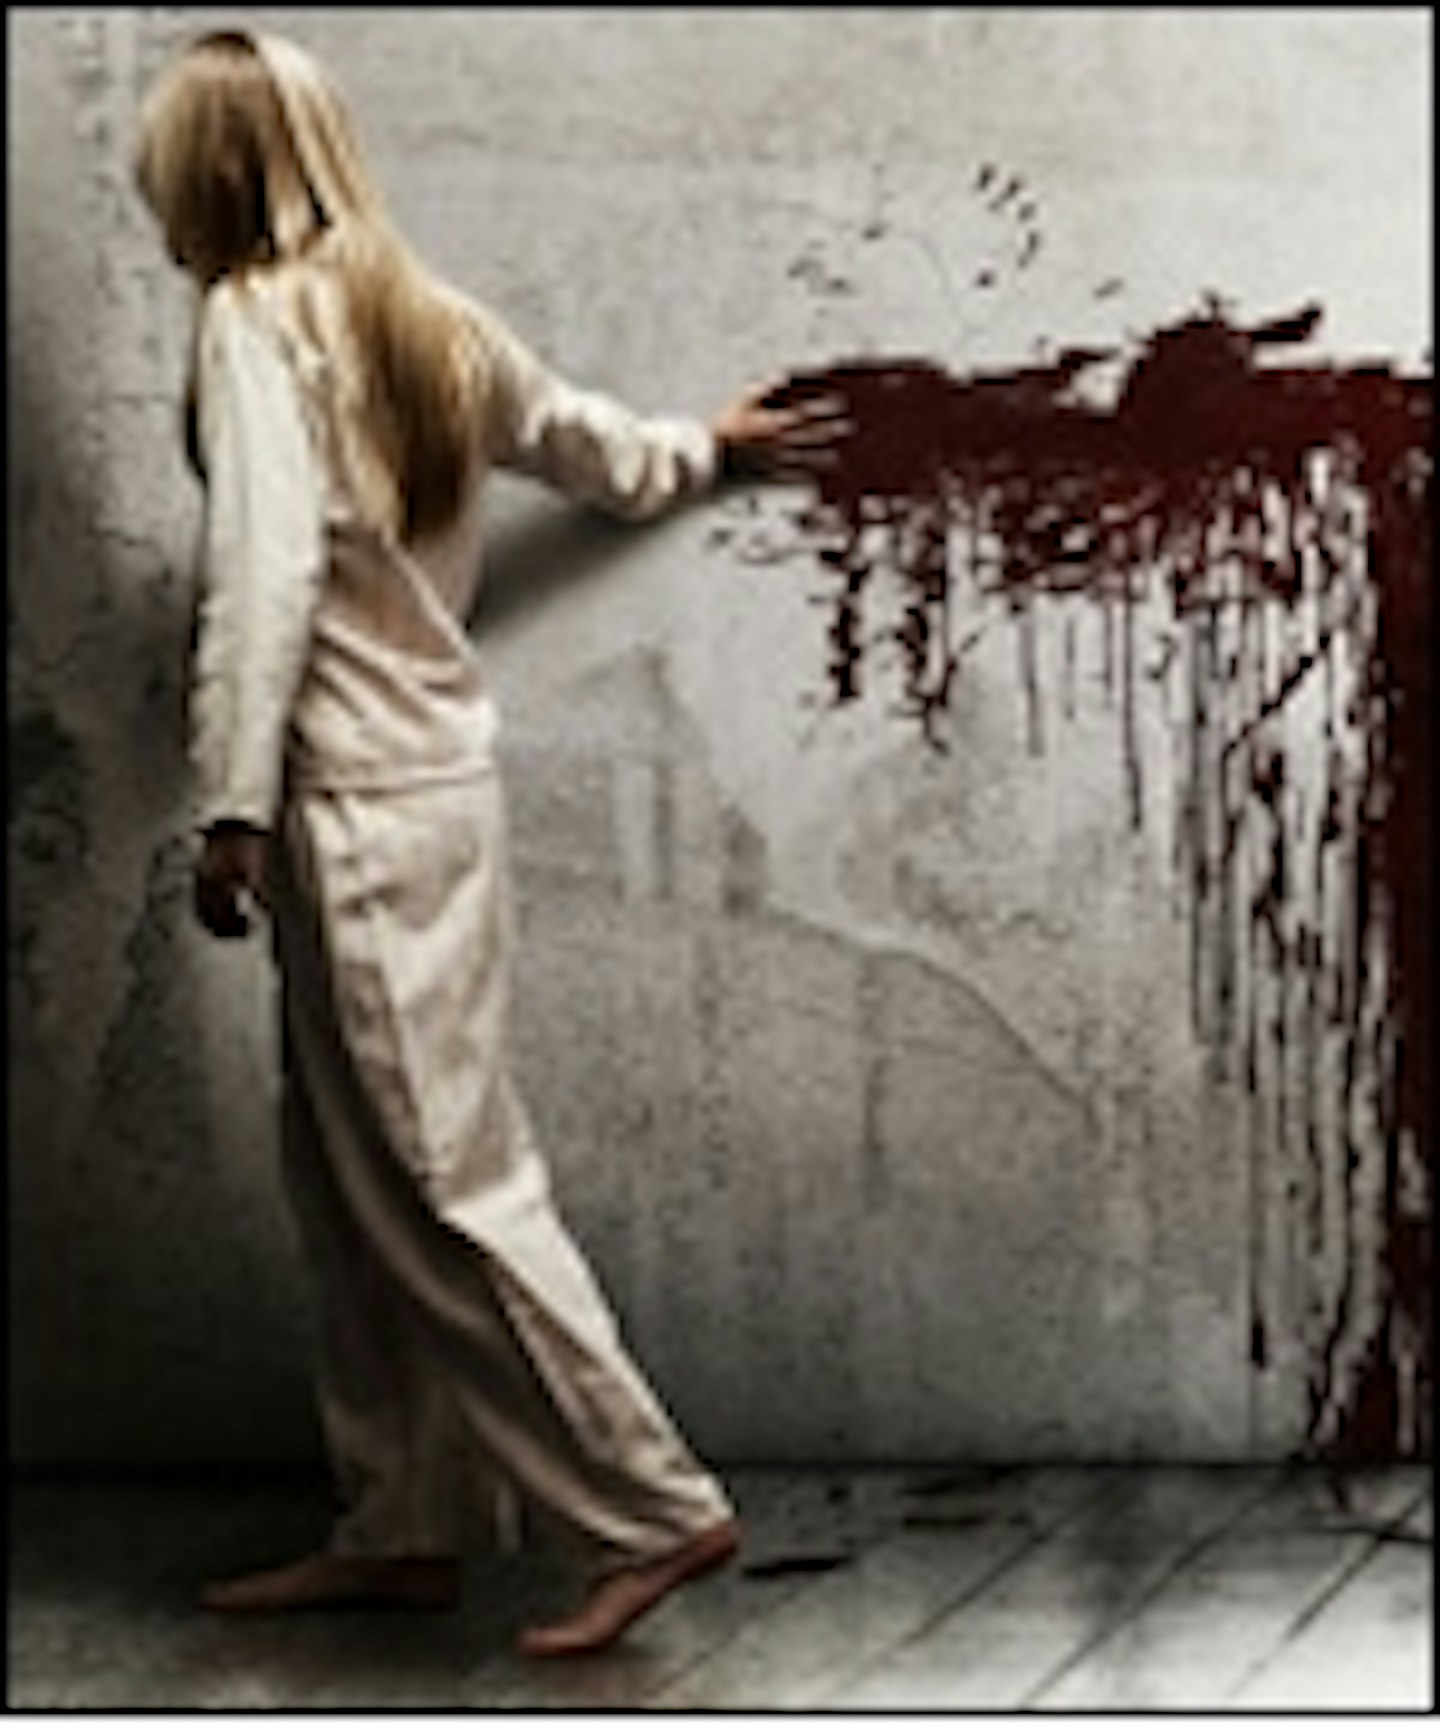 New Sinister Posters Online